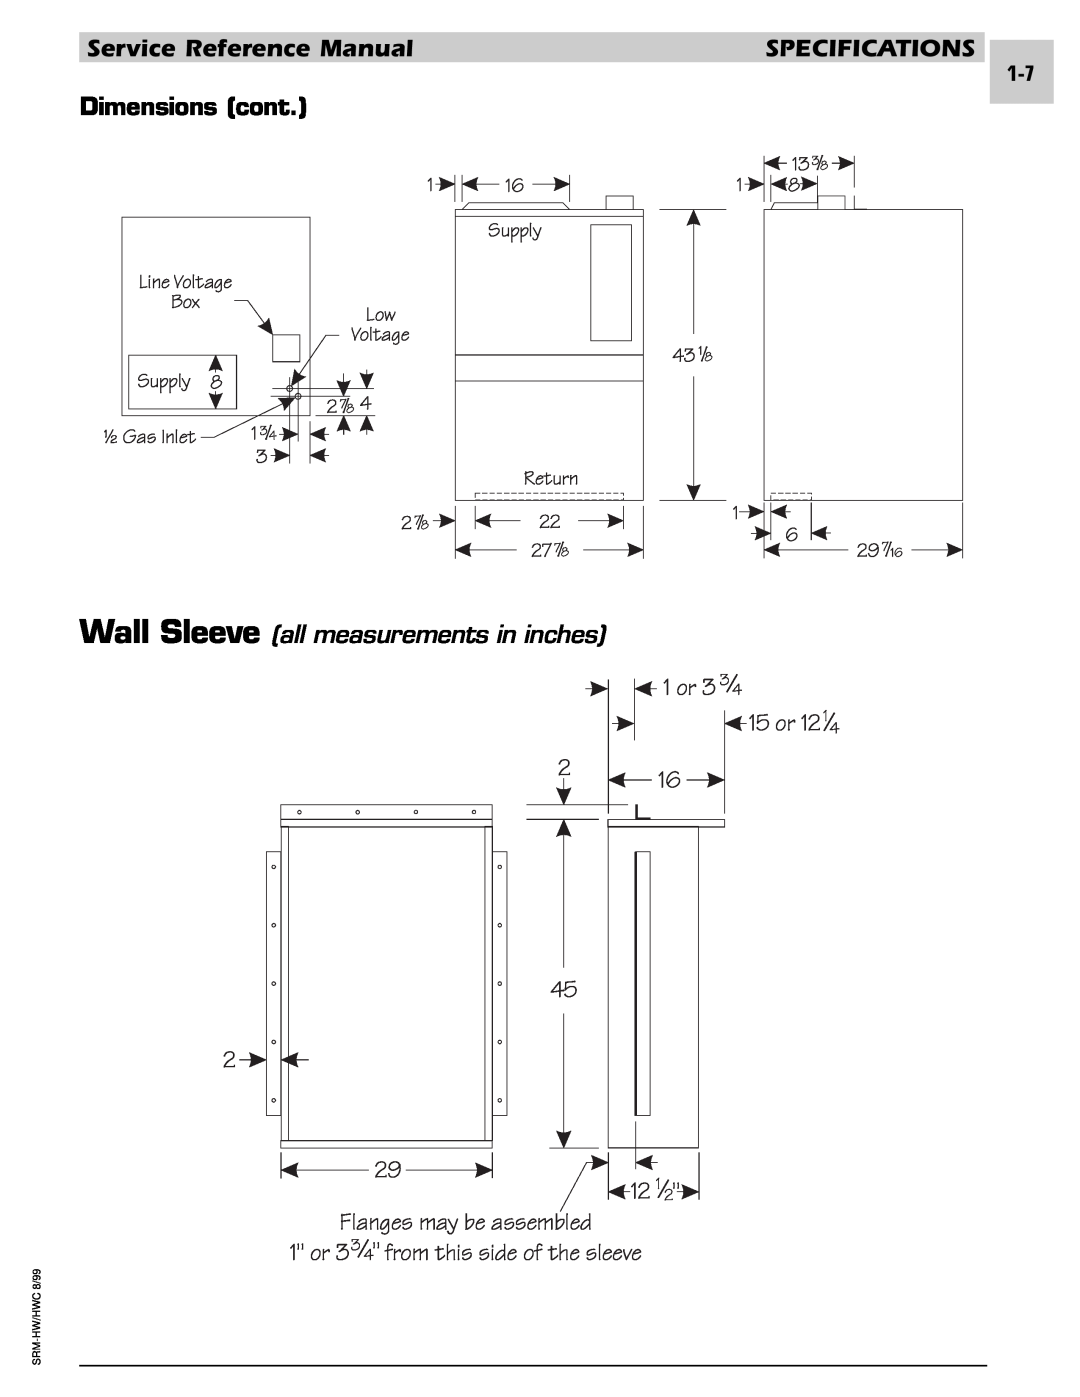 Armstrong World Industries 242, 243, 302, 122, 123, 203, 182, 183 Wall Sleeve all measurements in inches, 1 or 3 3 15 or 121 